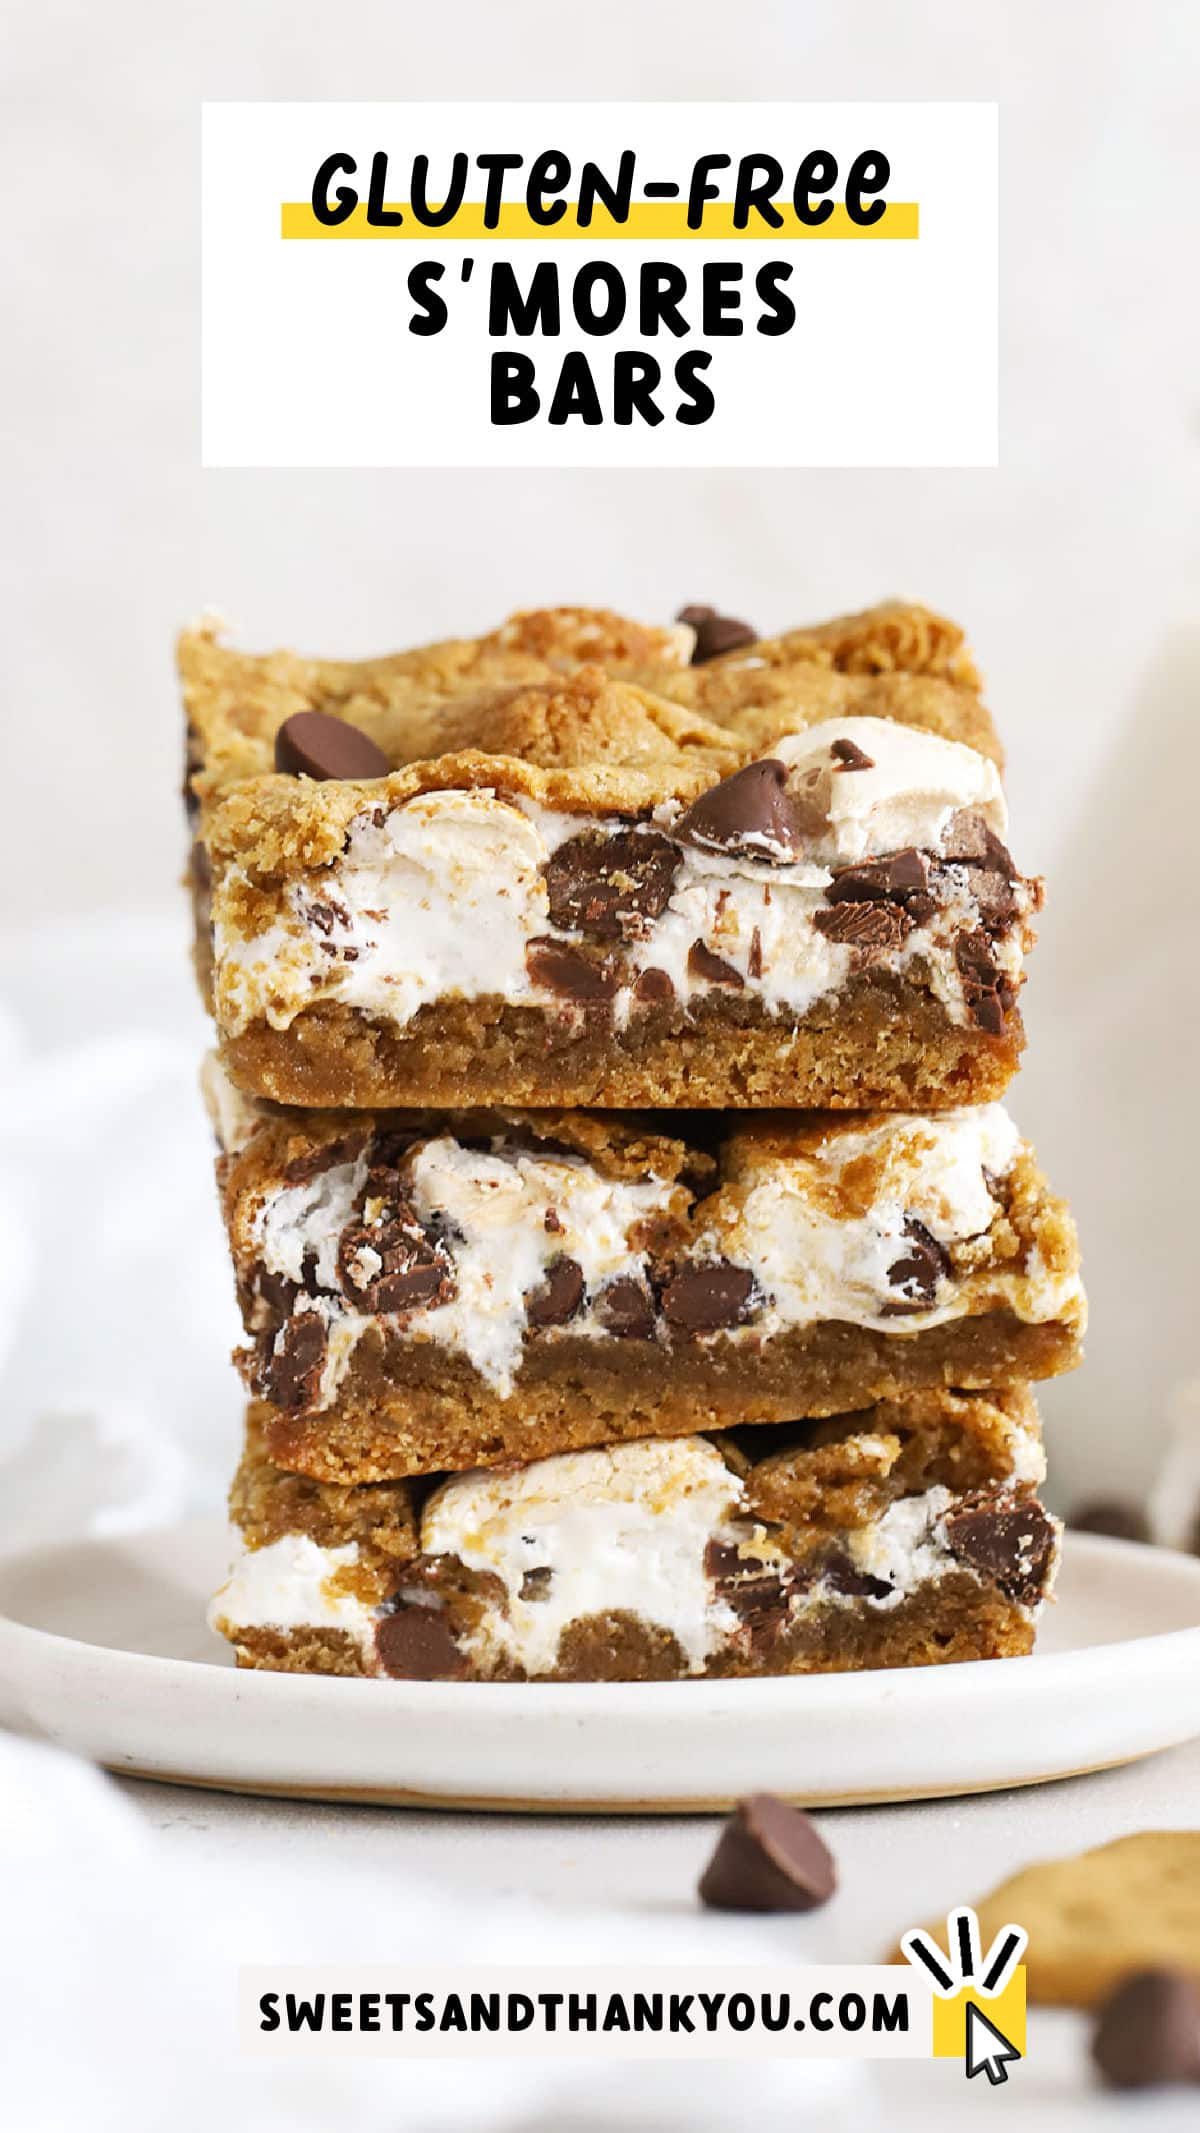 Soft, chewy gluten-free s'mores bars made with gooey marshmallow and melty chocolate between two layers of graham cookie. Yum! These gluten-free s'mores cookie bars are a fun summer dessert that channels the classic flavor of a s'more into a delicious cookie bar! Get the recipe at Sweets & Thank You